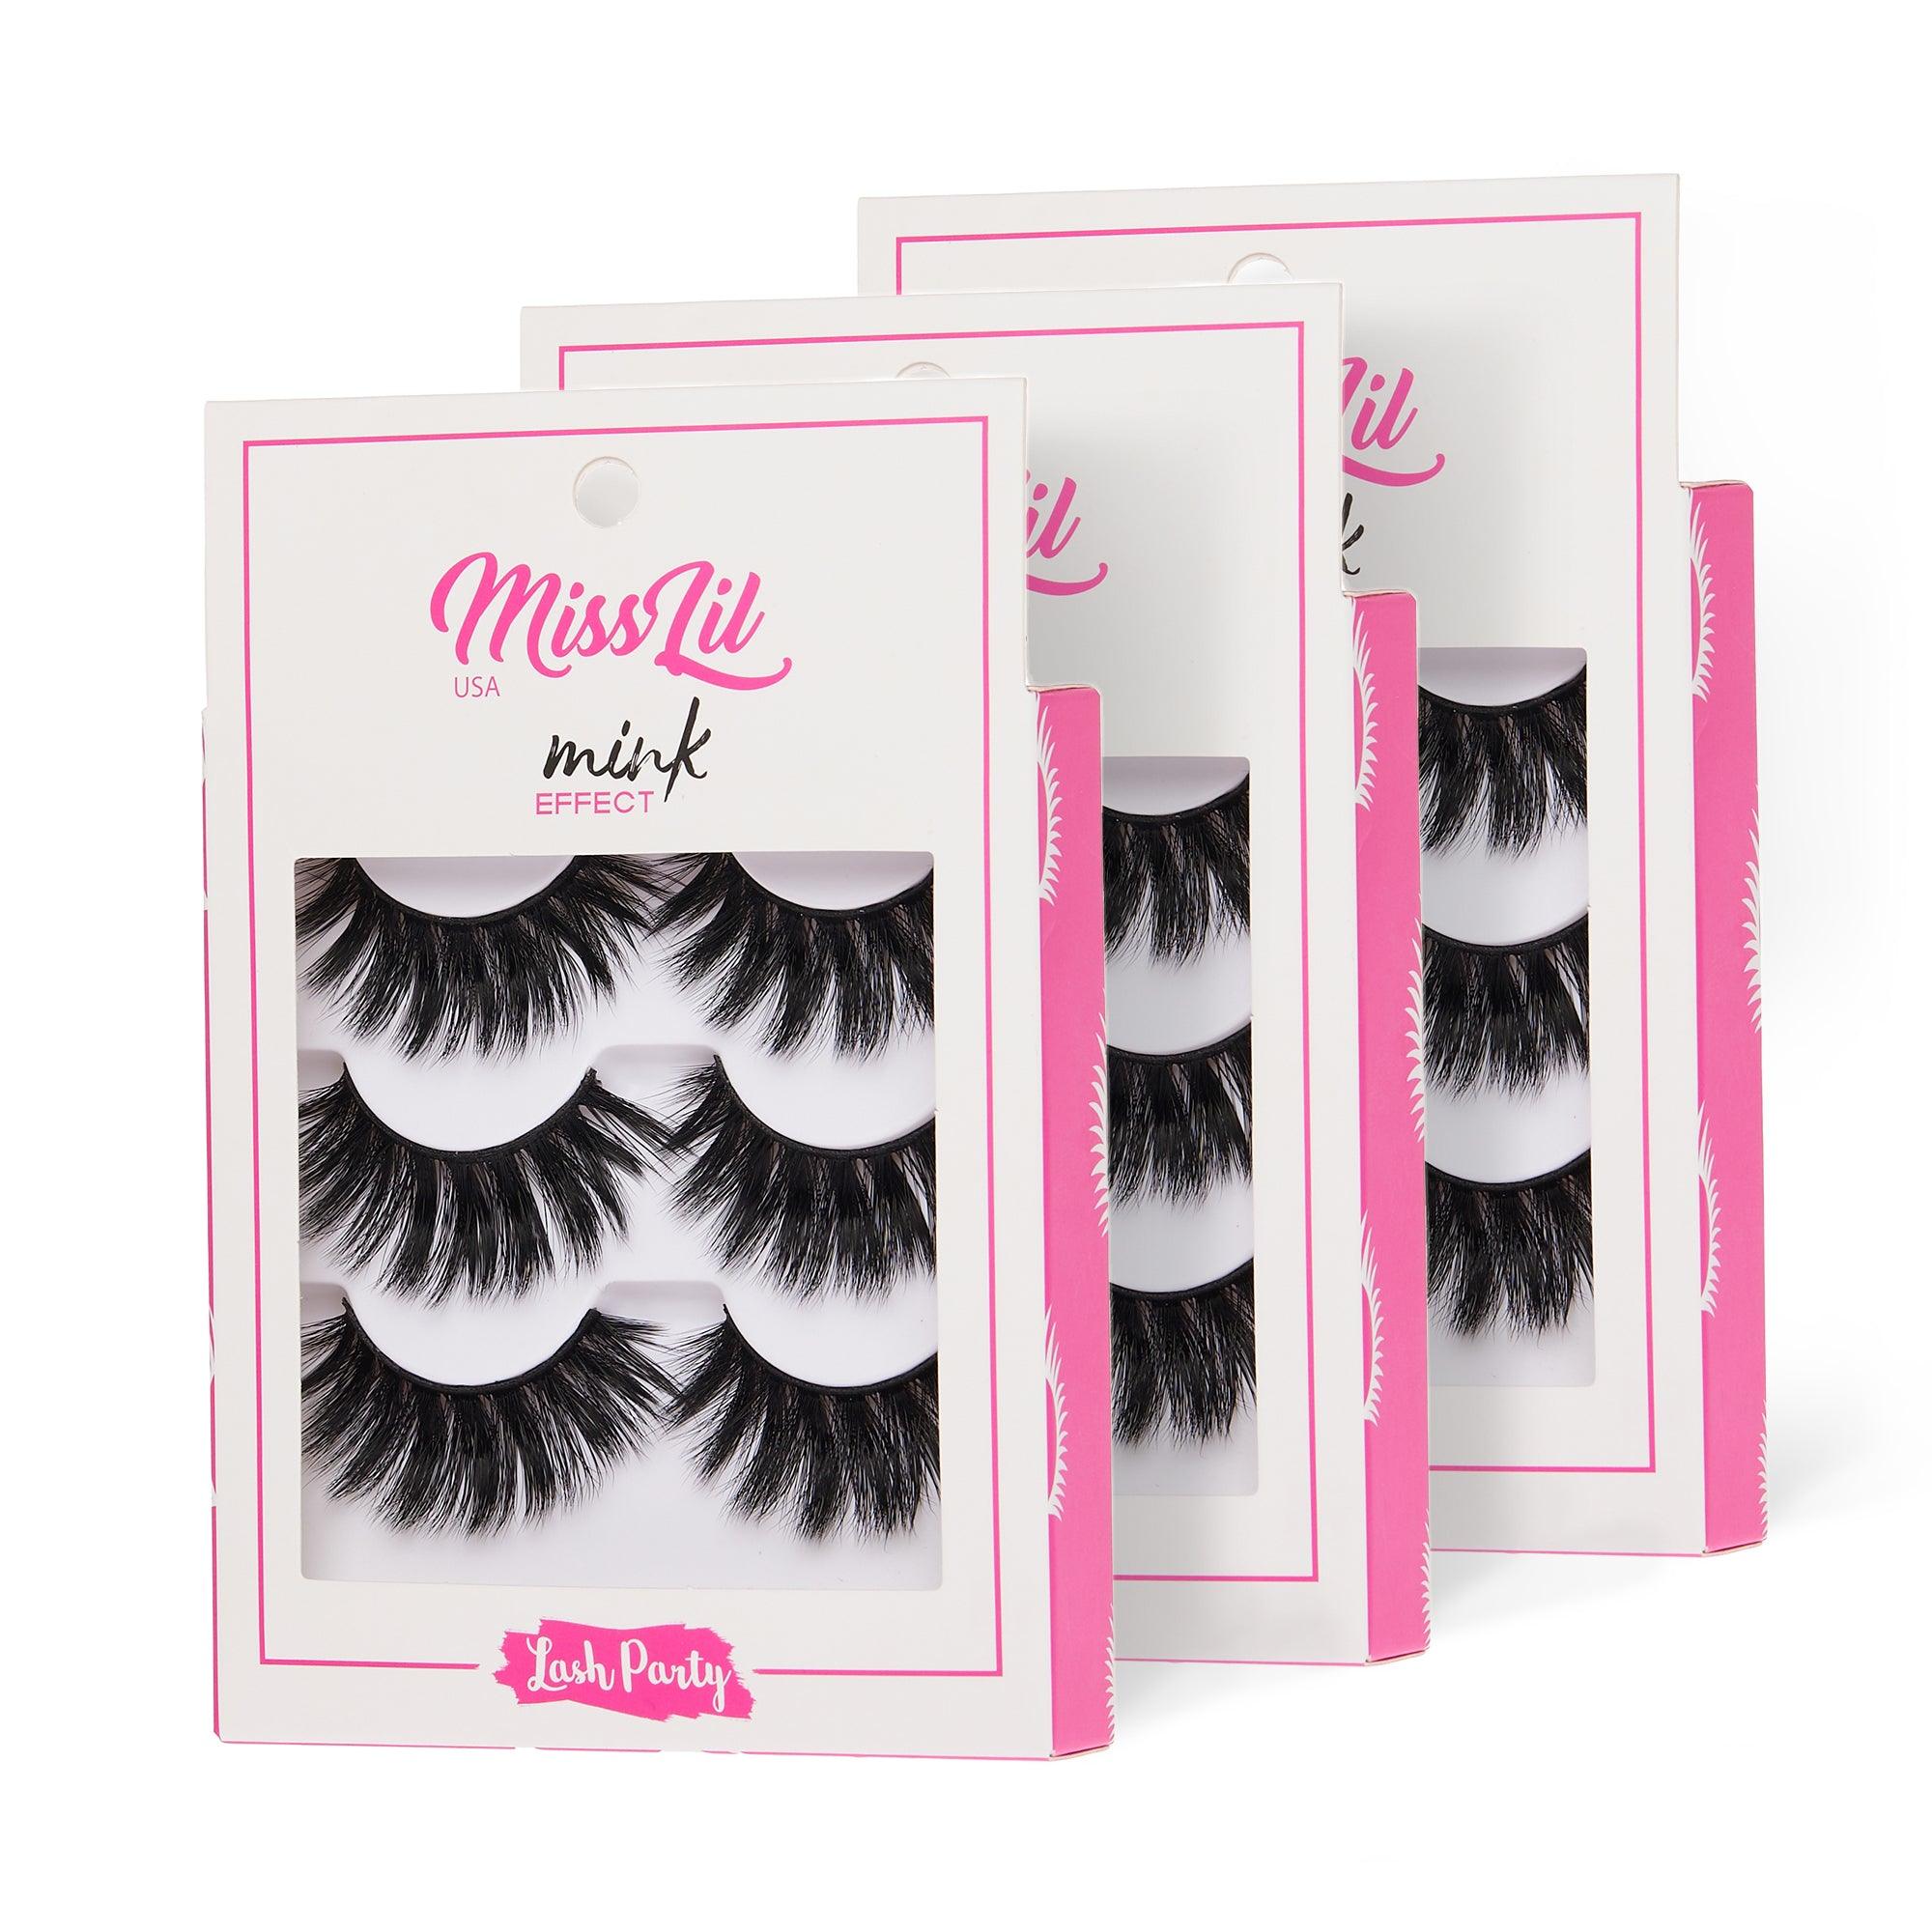 3-Pair Faux Mink Effect Eyelashes - Lash Party Collection #27 - Pack of 3 - Miss Lil USA